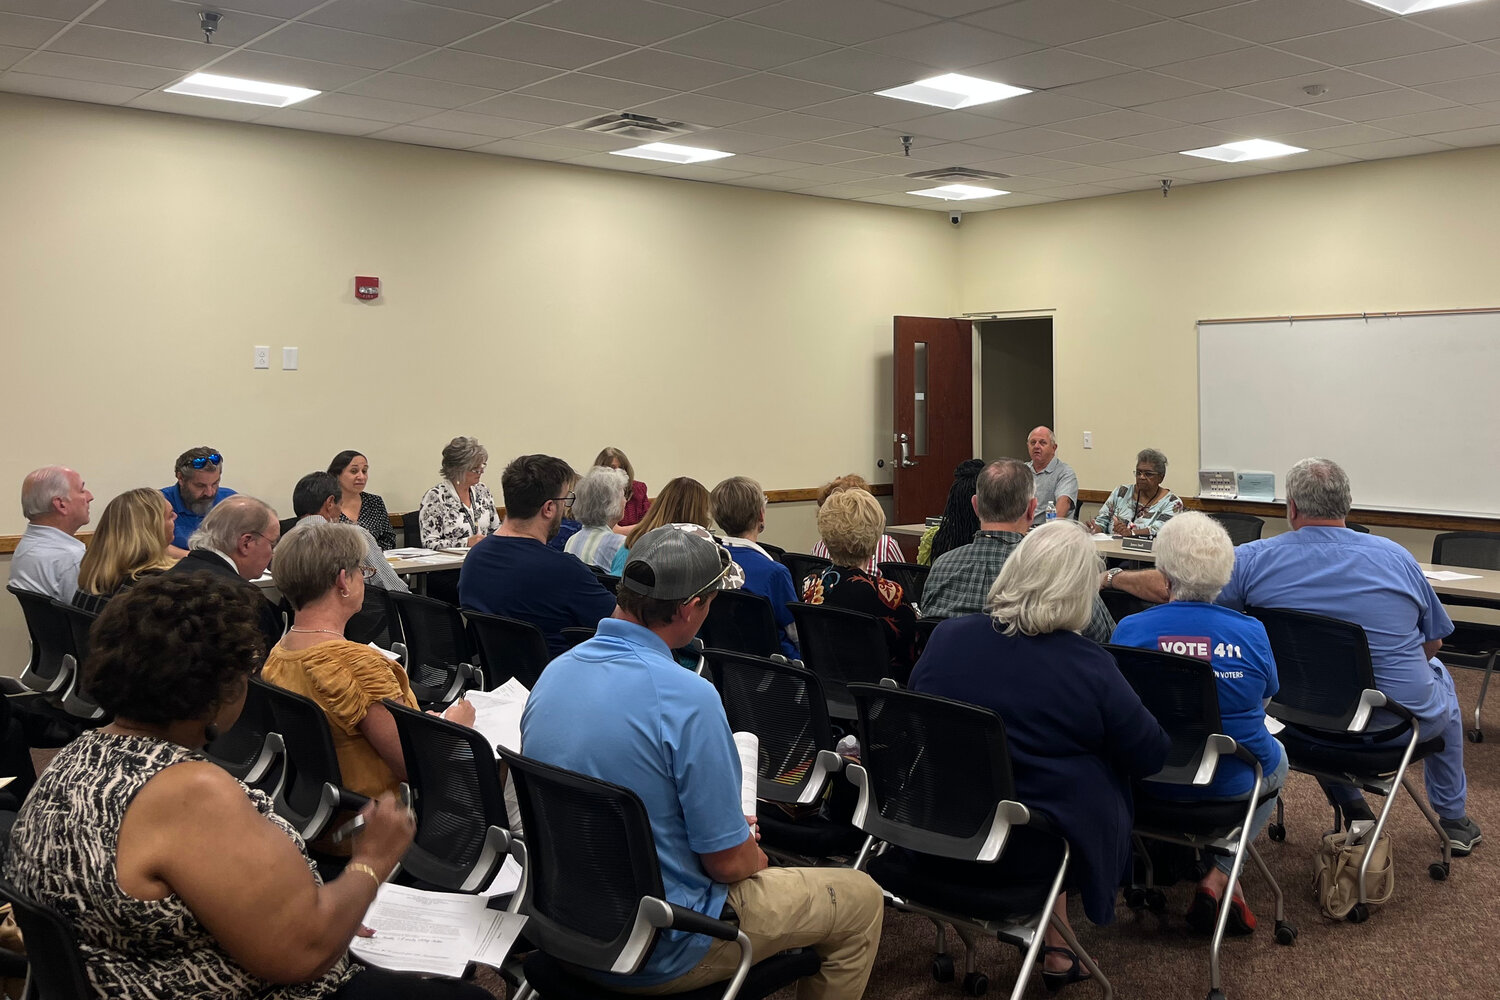 The Lexington County Board of Voter Registration and Elections held an emergency meeting Sept. 25 to explain to local municipalities why there will be just one early voting site ahead of the November election.